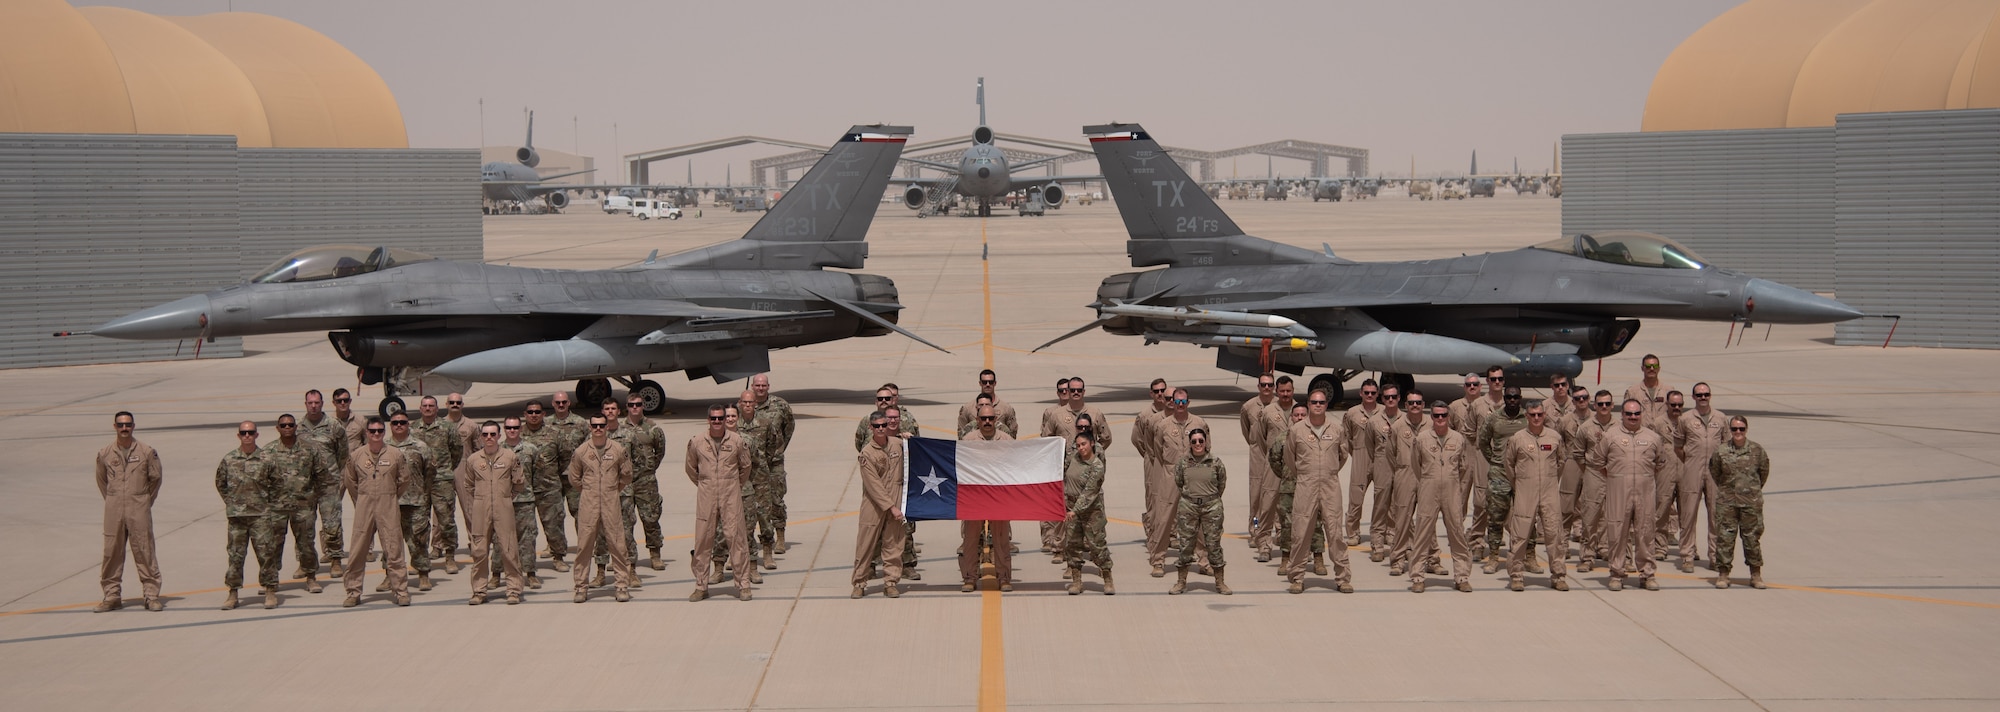 Farewell to the Falcon: 457th EFS concludes last deployment flying the F-16